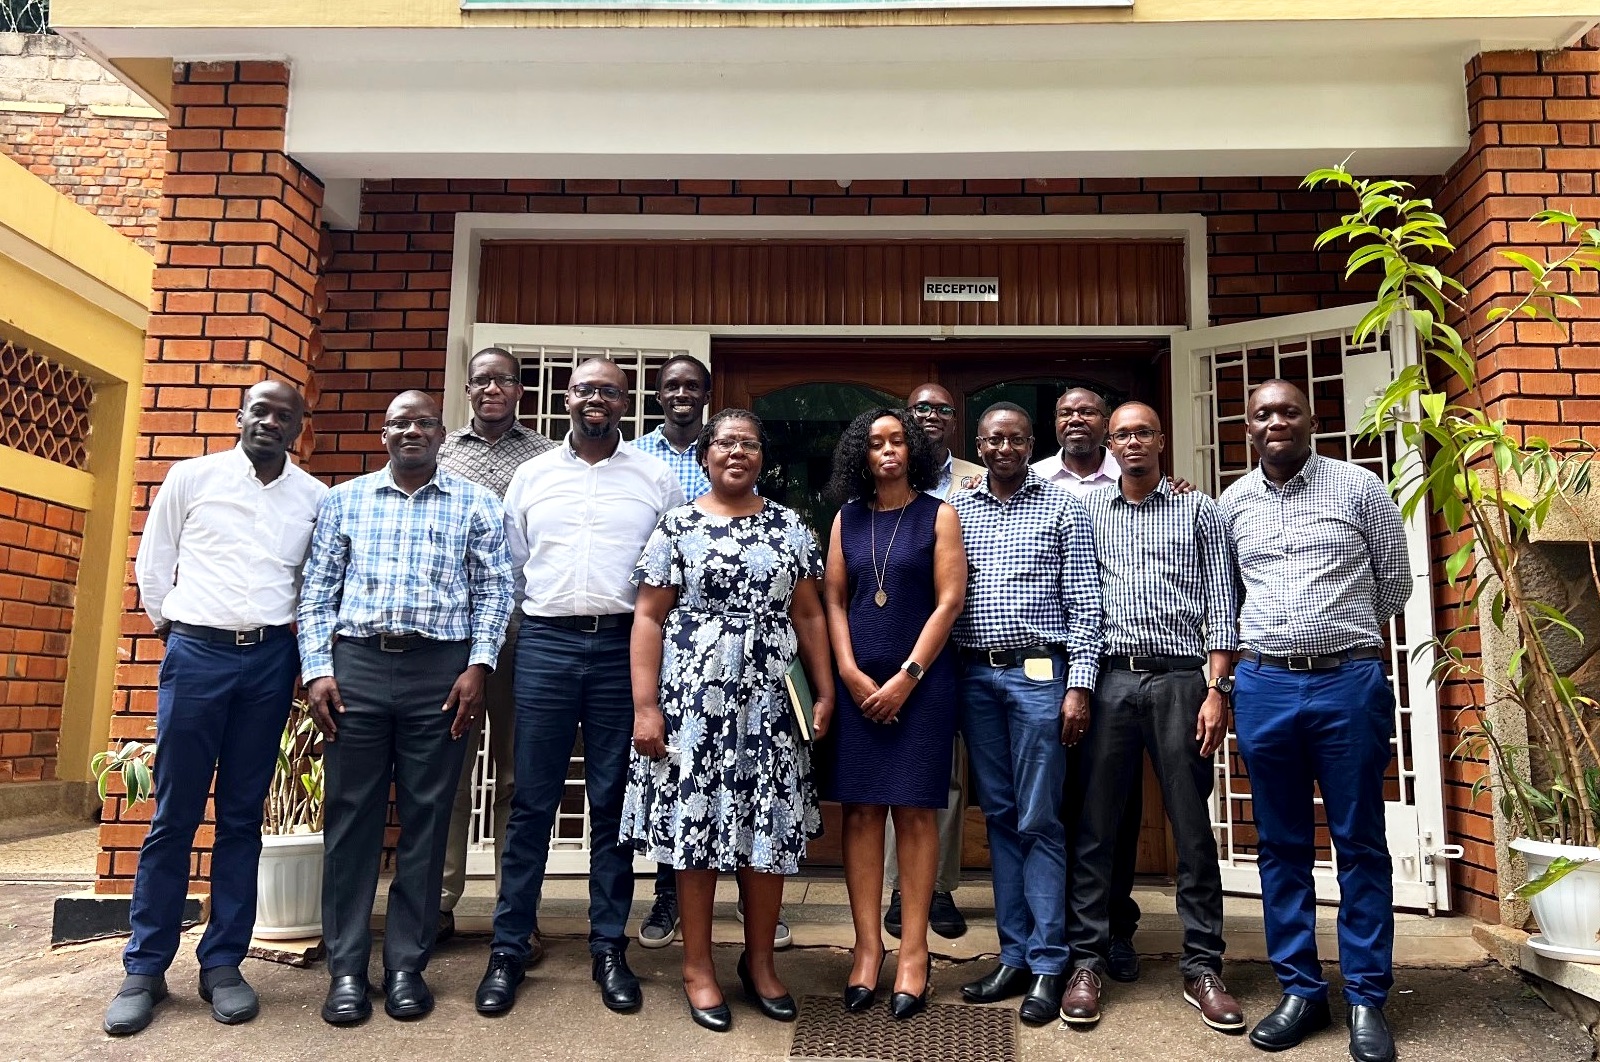 The Director, Dr. Alice Namale (4th Left) with teams from CDC Kenya, CDC Uganda and MakSPH-METS after the debrief meeting at METS offices. Makerere University School of Public Health-METS, Kololo, Kampala Uganda, East Africa.